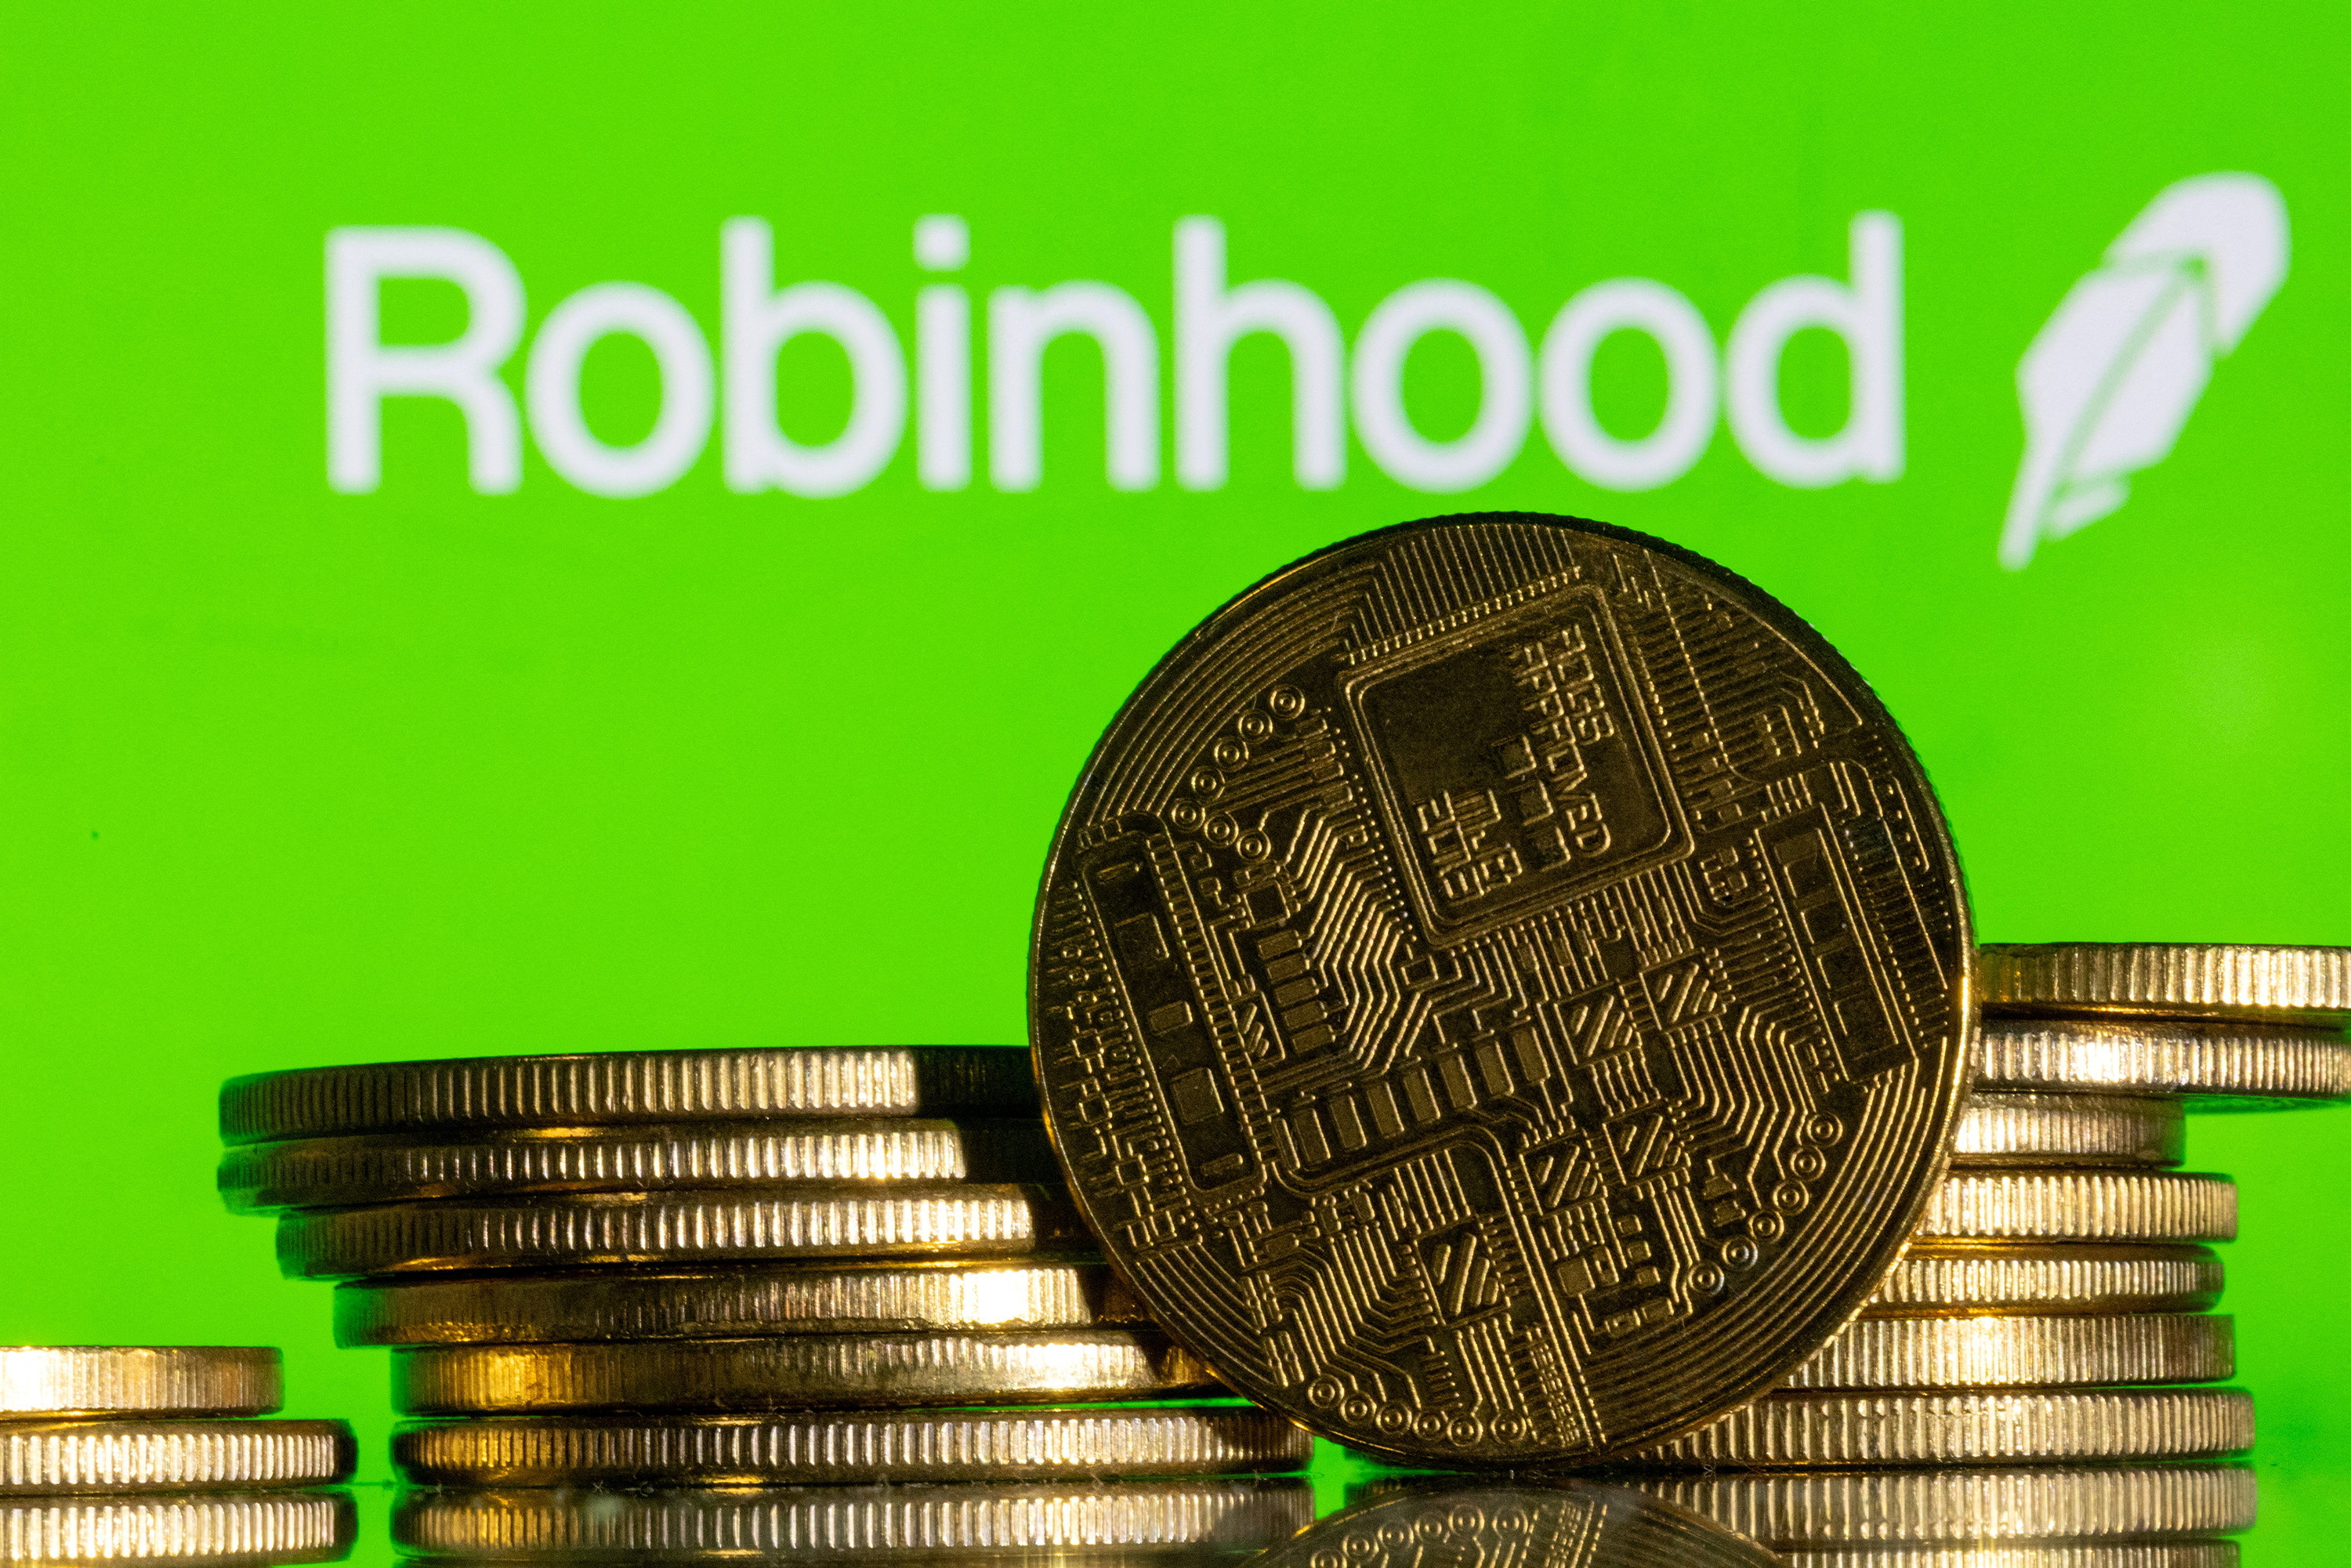 Illustration shows Robinhood logo and representations of cryptocurrency